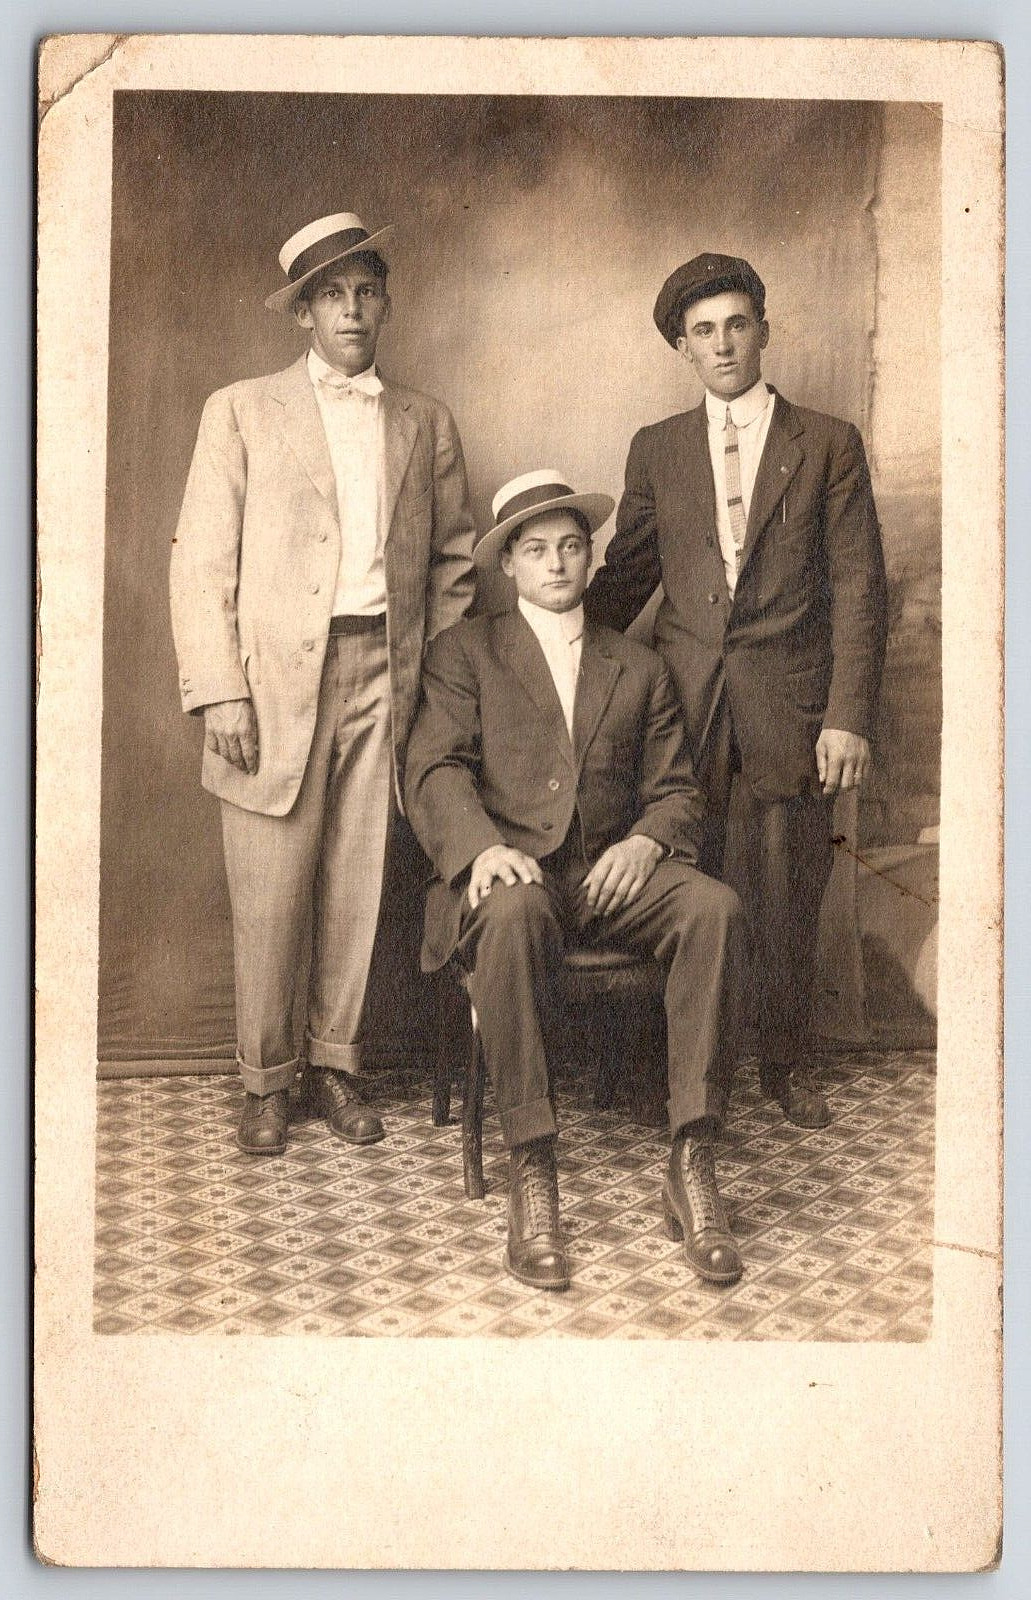 Original RPPC, 3 Men In Suits Ties And Hats, Antique, Real Photo Post Card